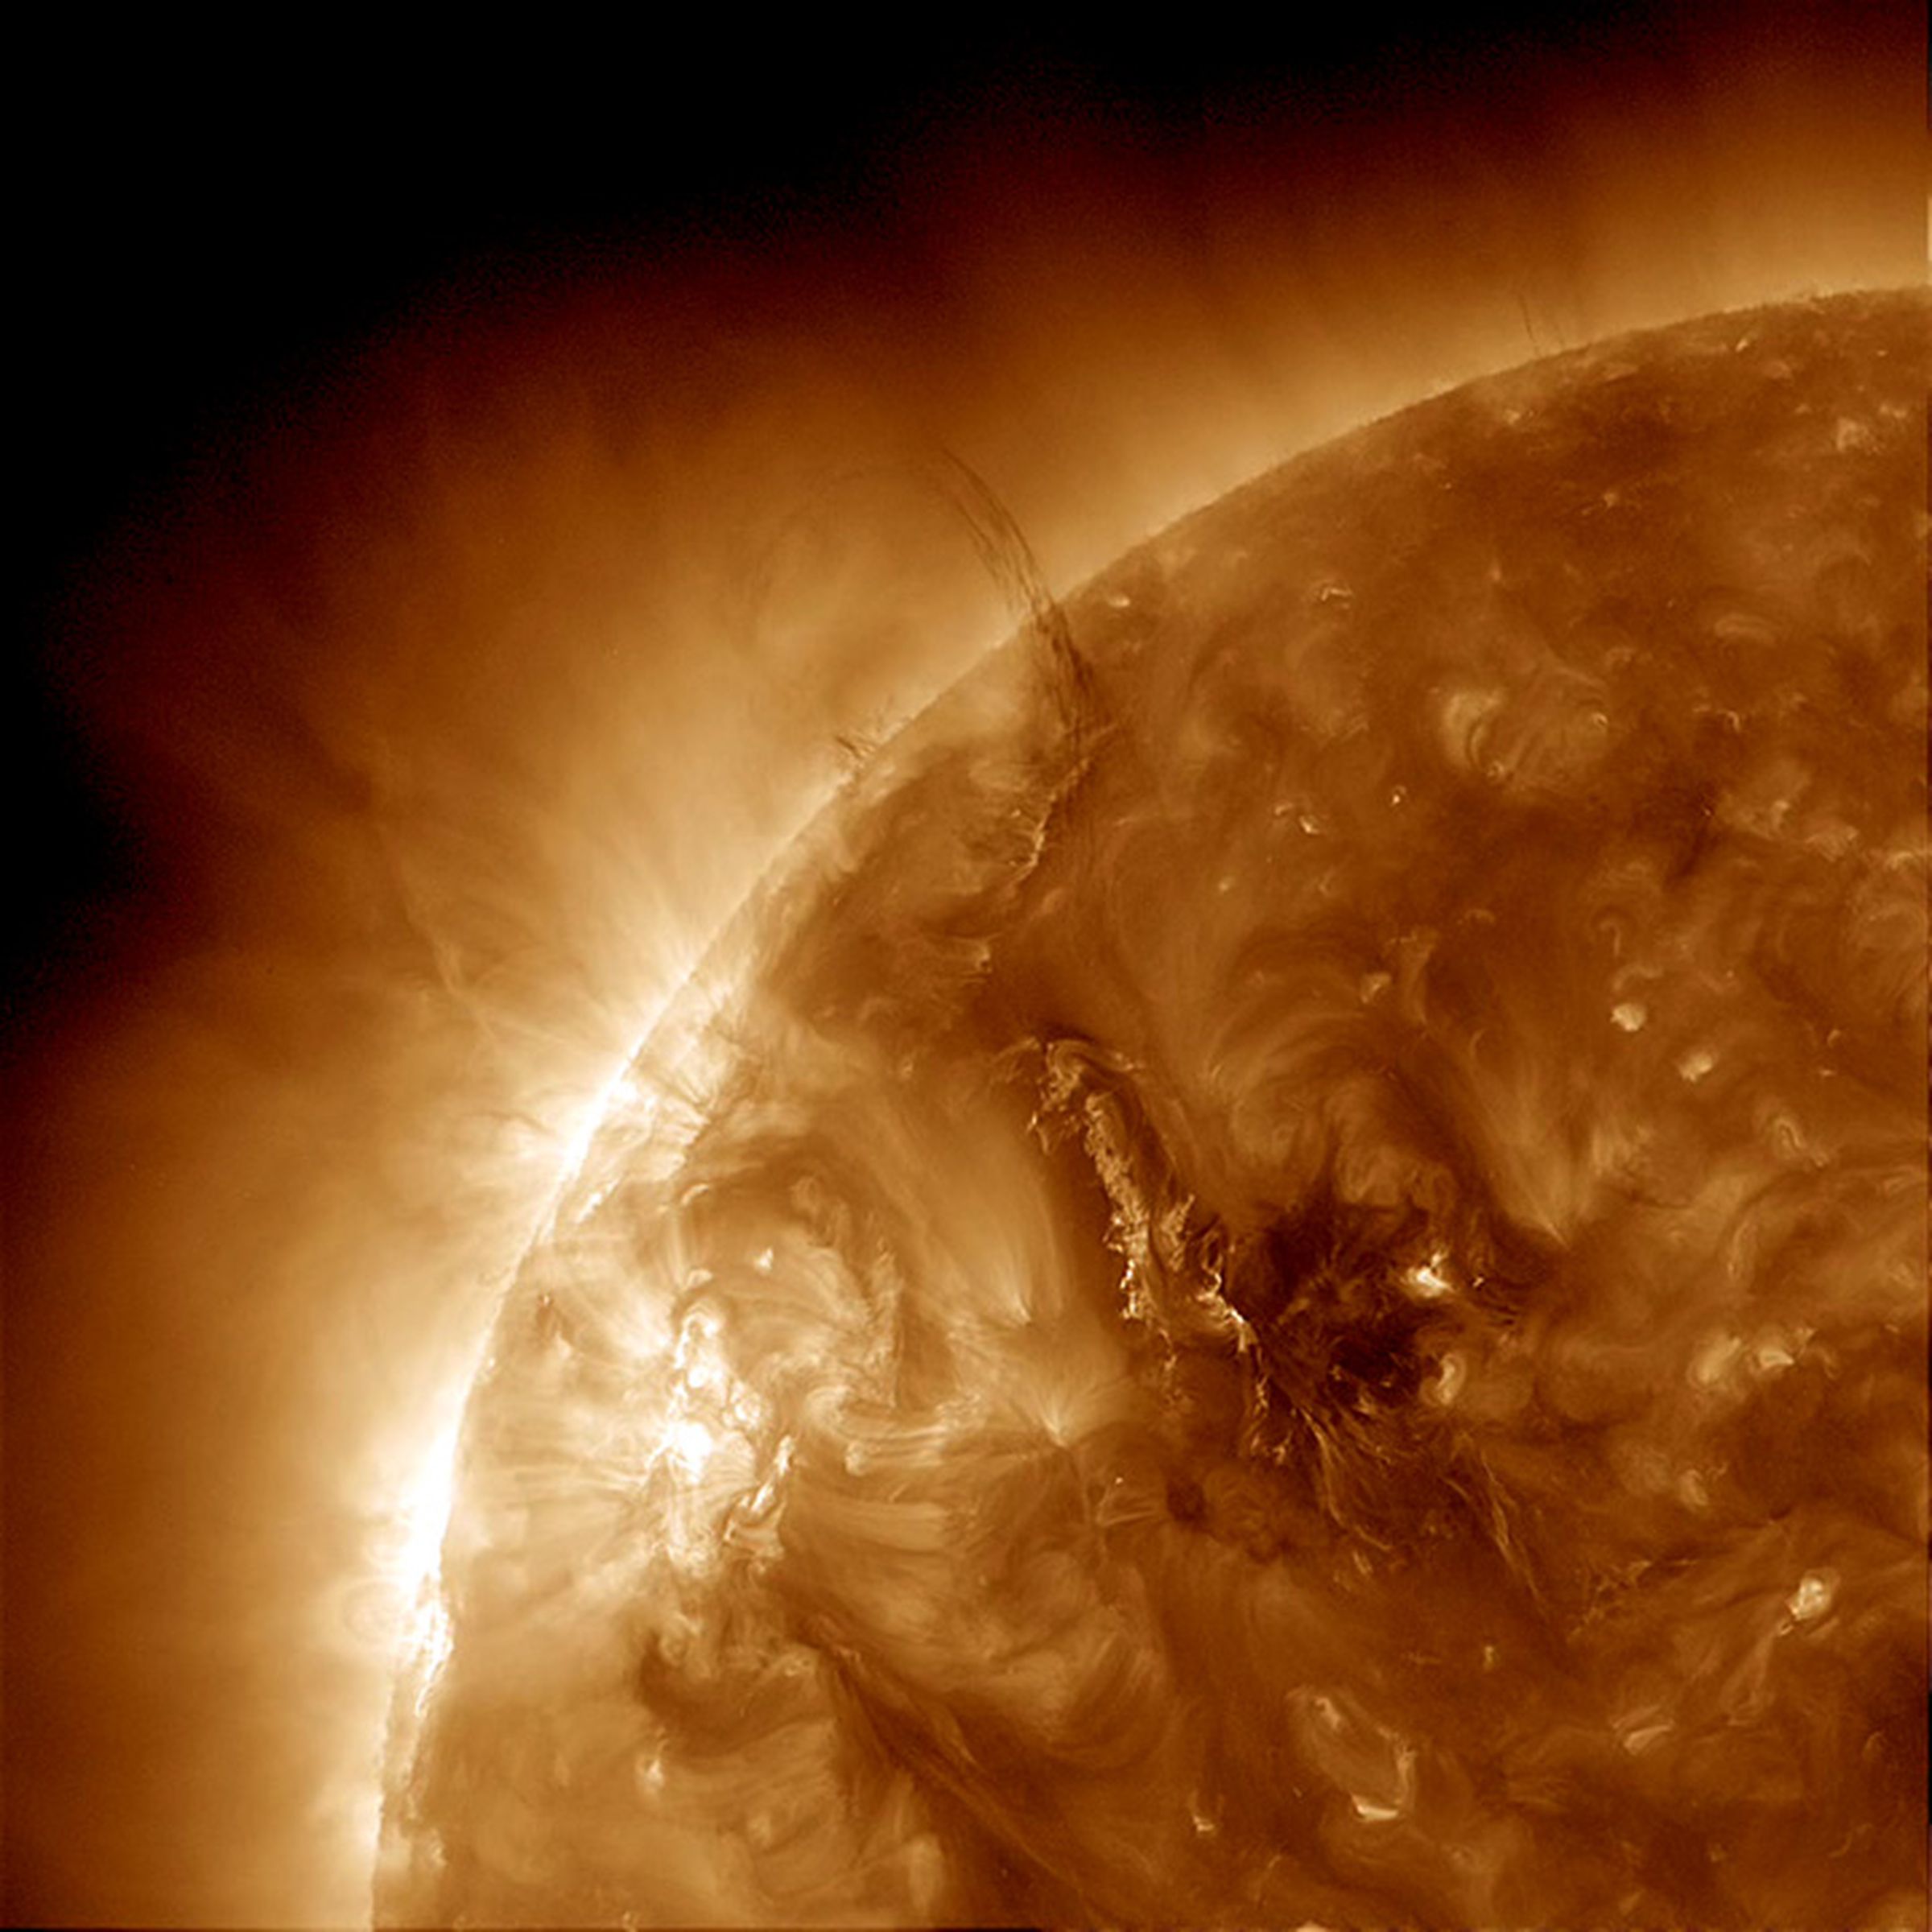 An image of an active region of the Sun’s corona, as seen from NASA’s Solar Dynamics Observatory.